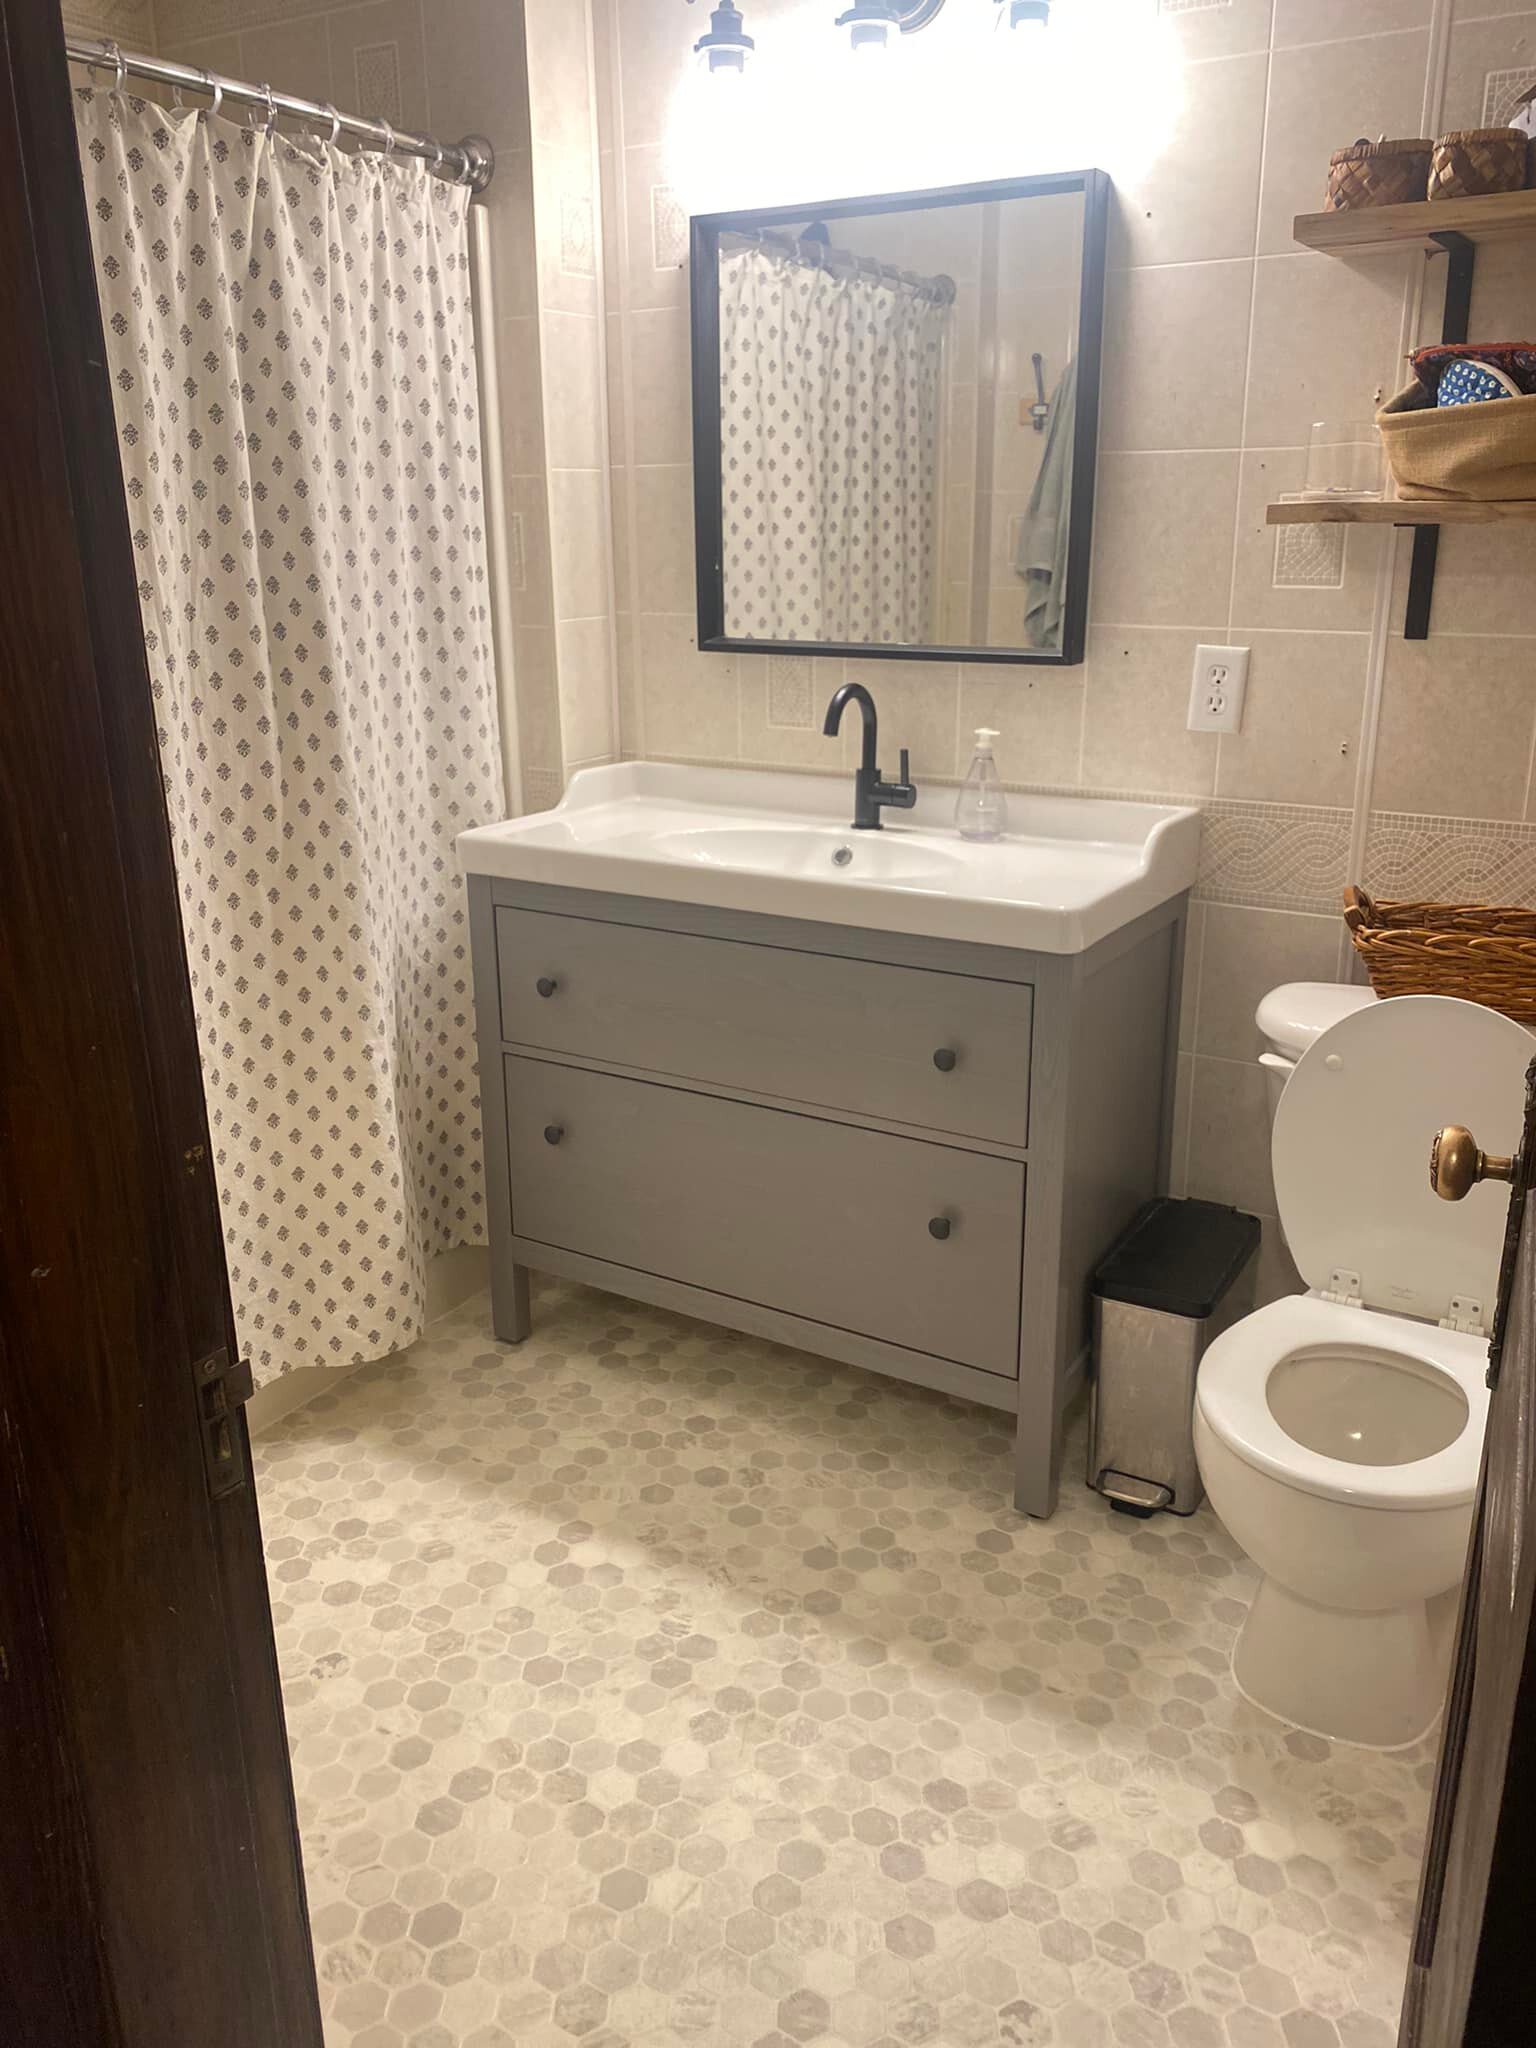 About two weeks after Kali gifts the flooring, the recipient posts a “gratitude” with a photo of it installed in her bathroom.